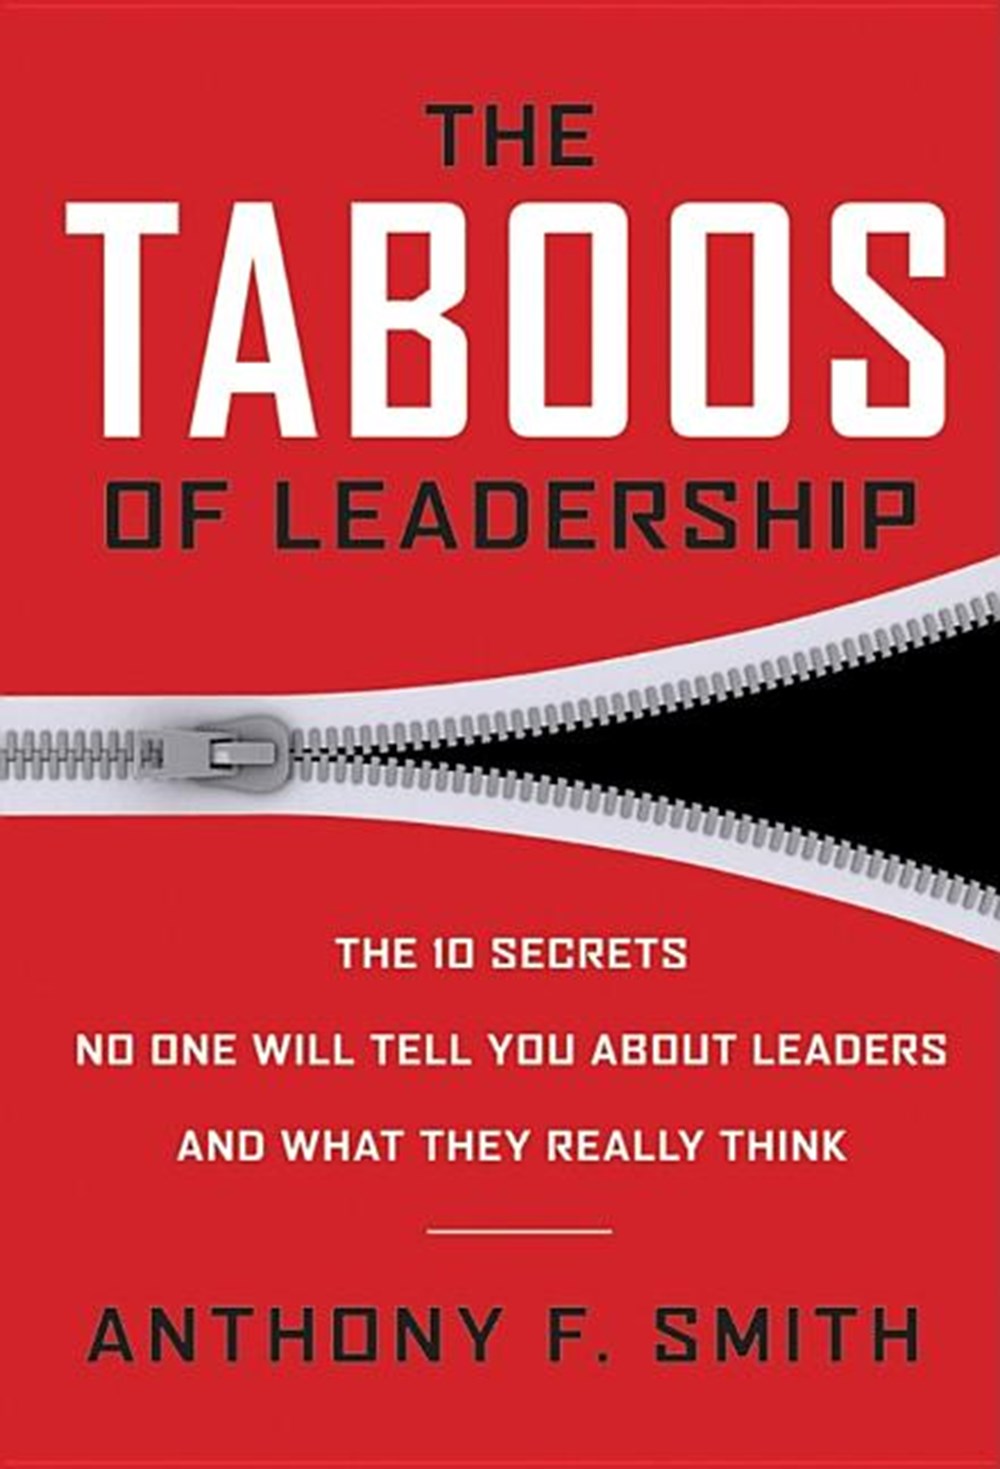 Taboos of Leadership: The 10 Secrets No One Will Tell You about Leaders and What They Really Think